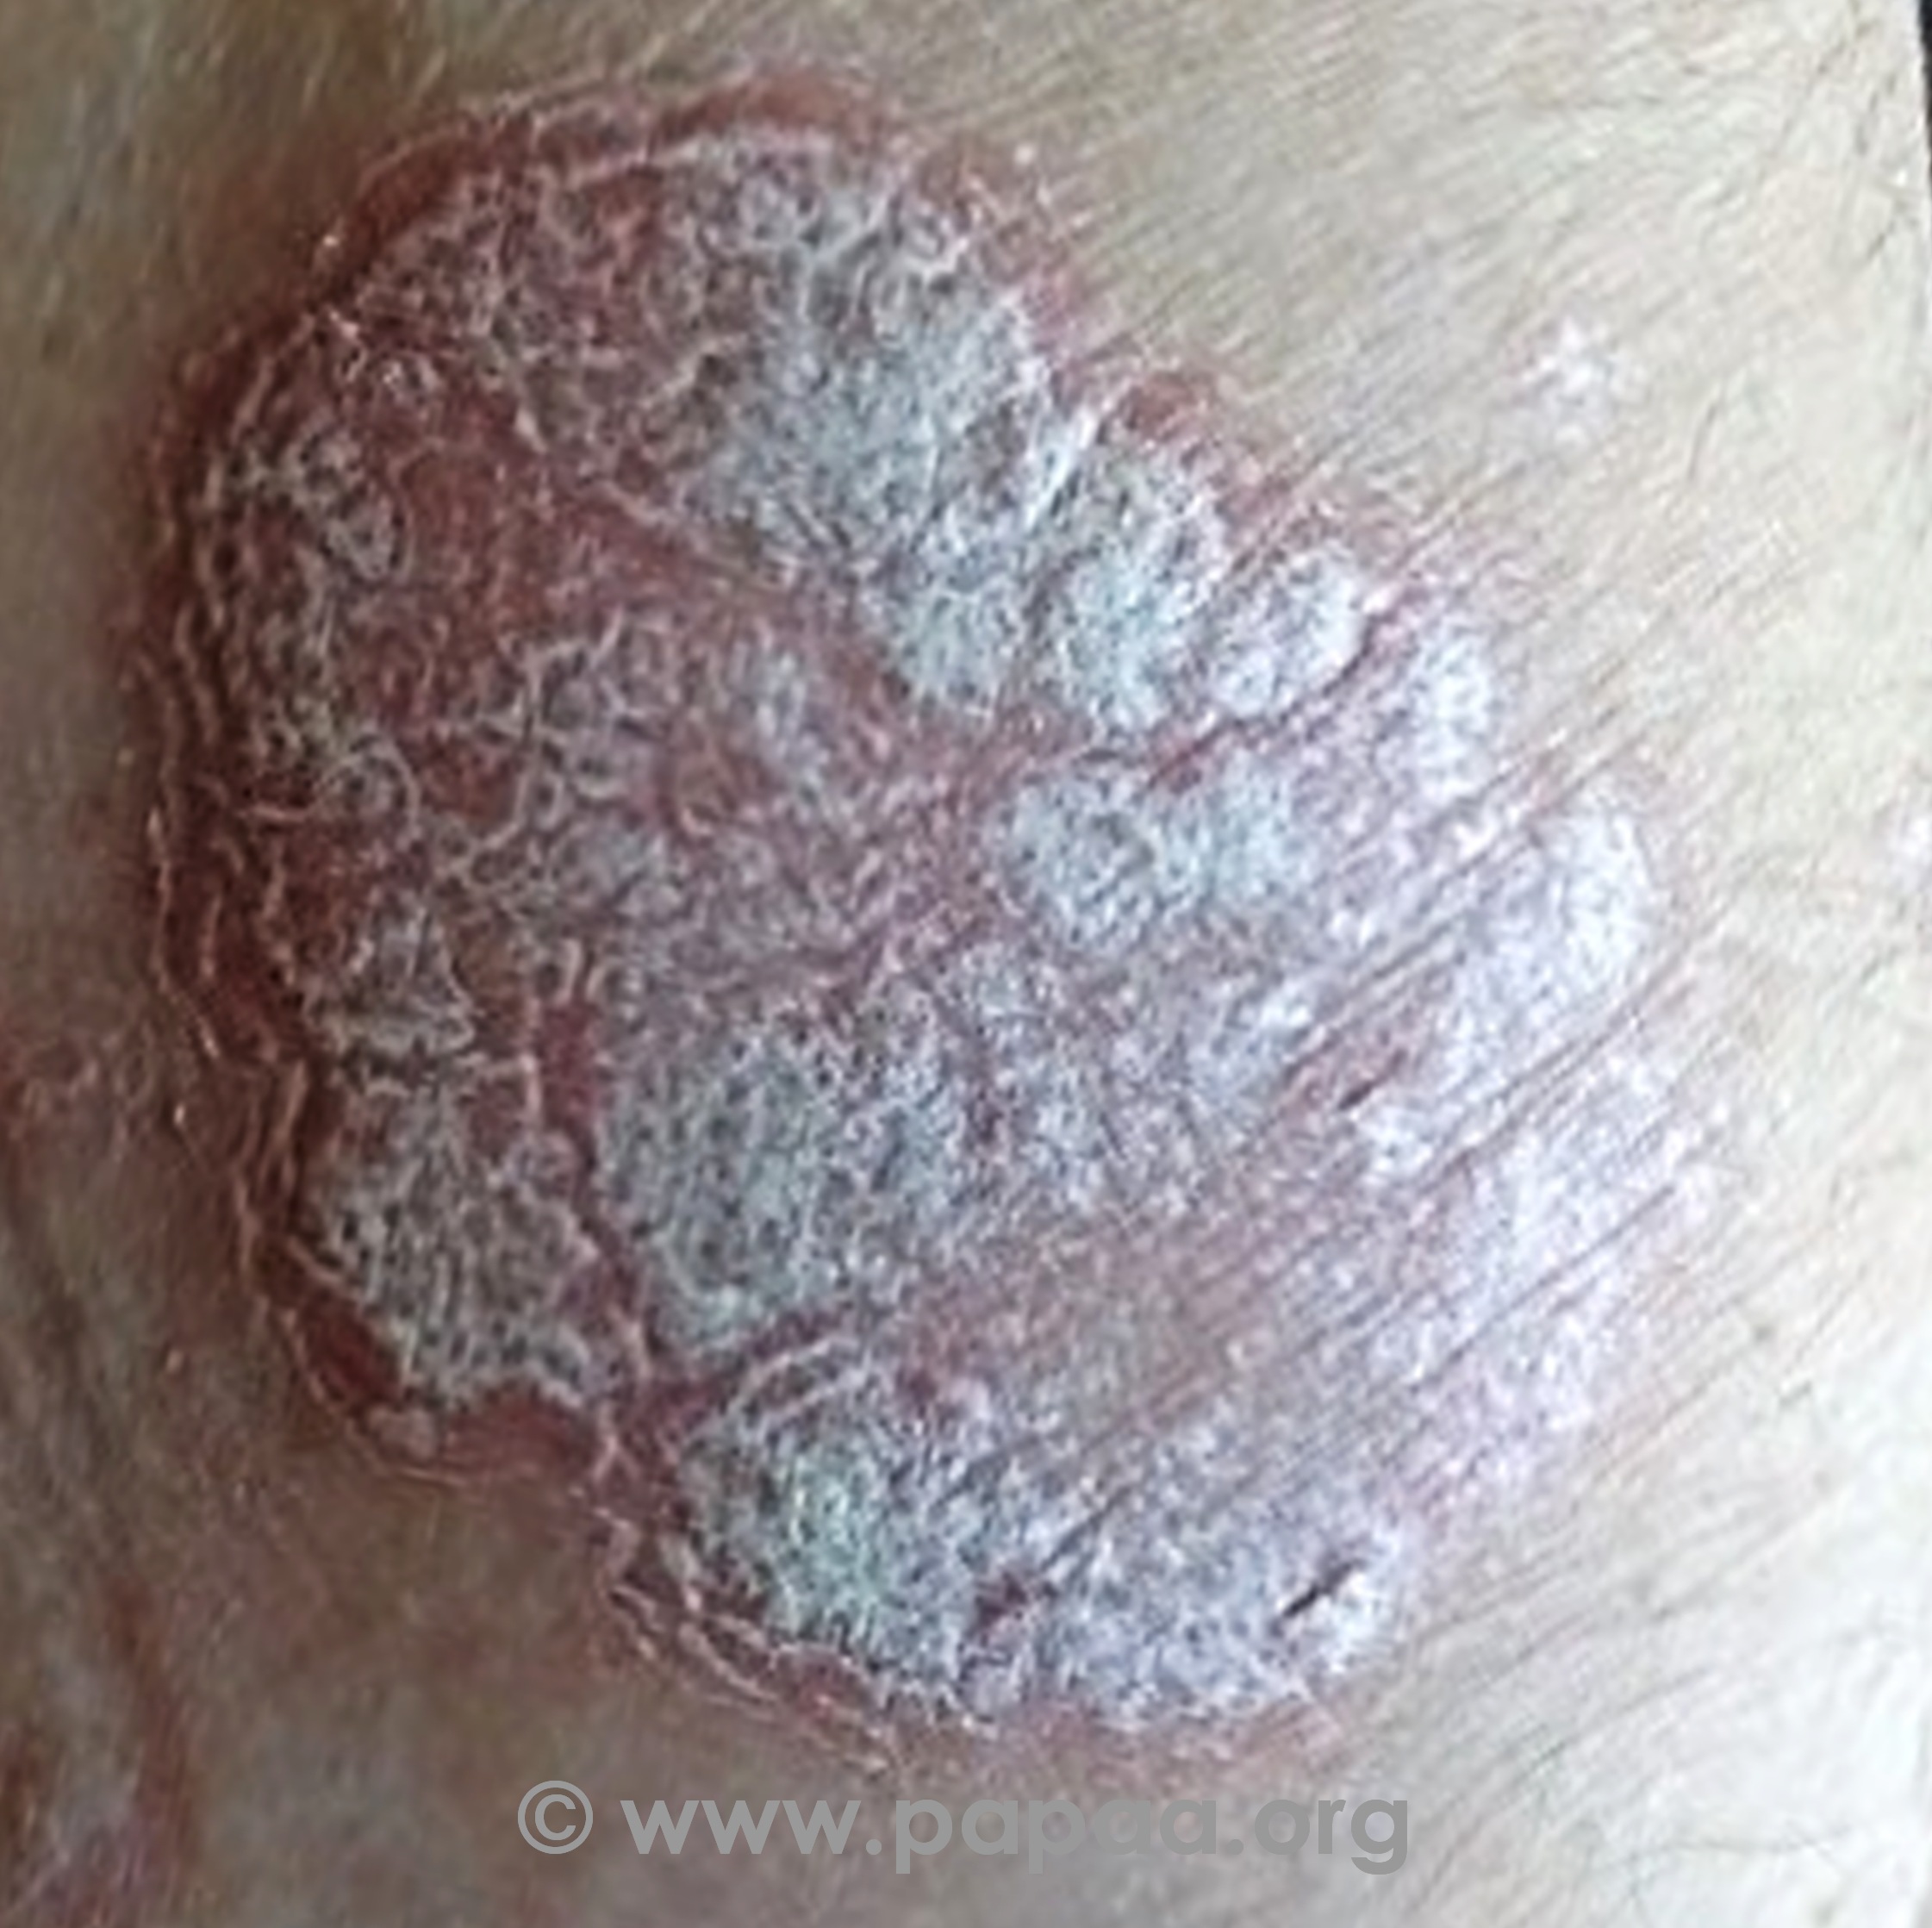 Plaque psoriasis (raised silvery scales)